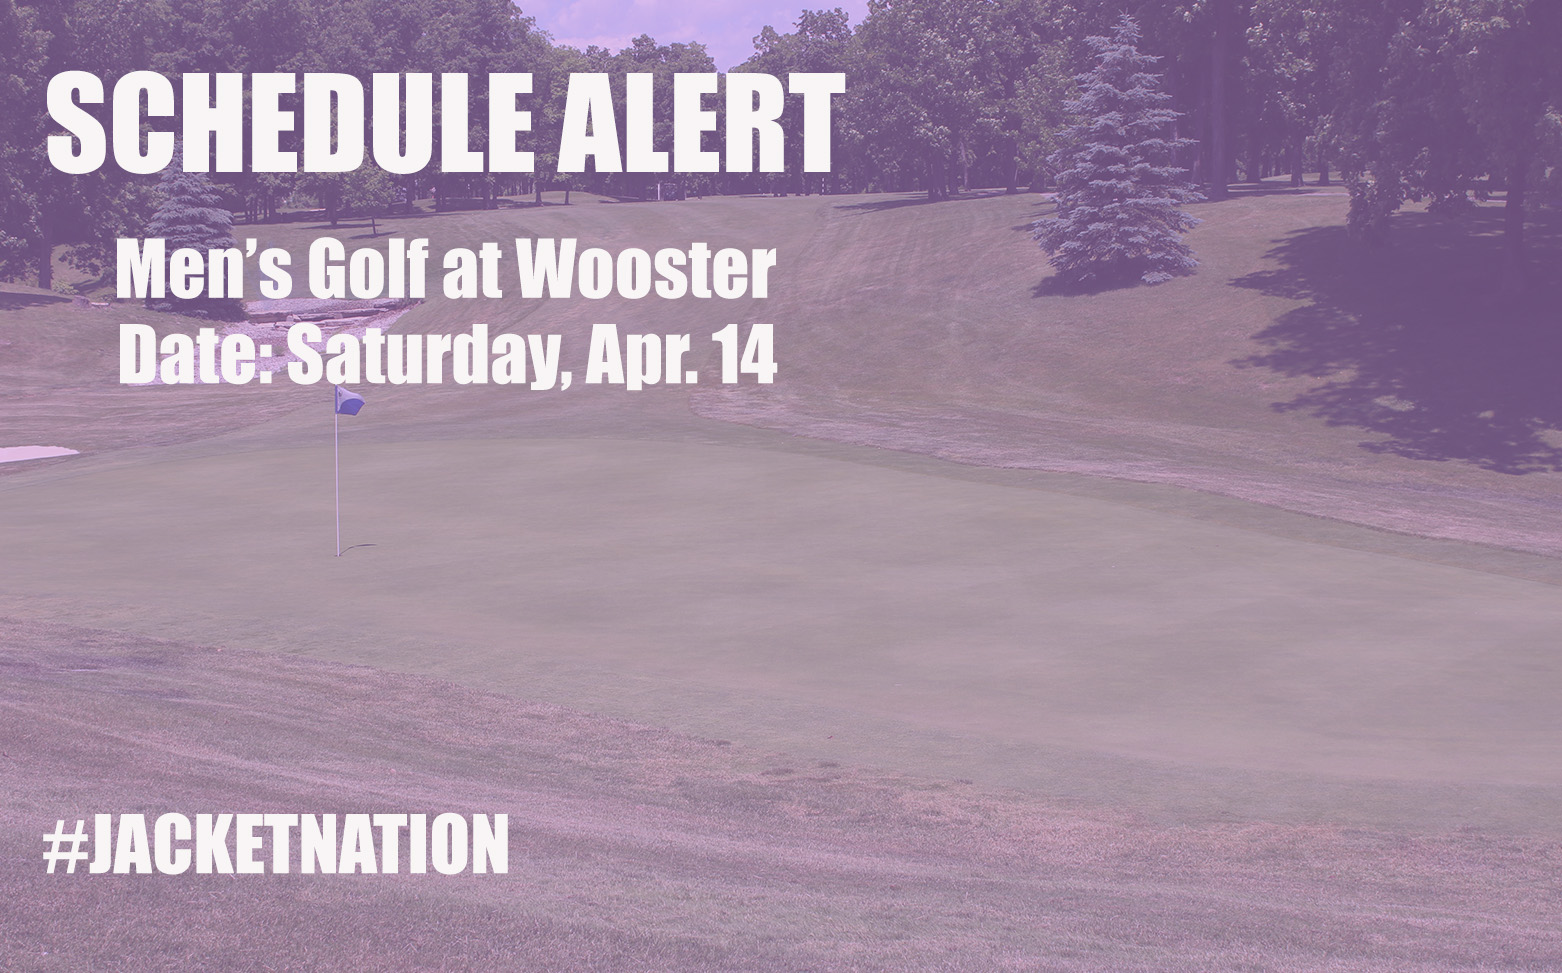 Inclement Weather Forces Change to Men's Golf Schedule